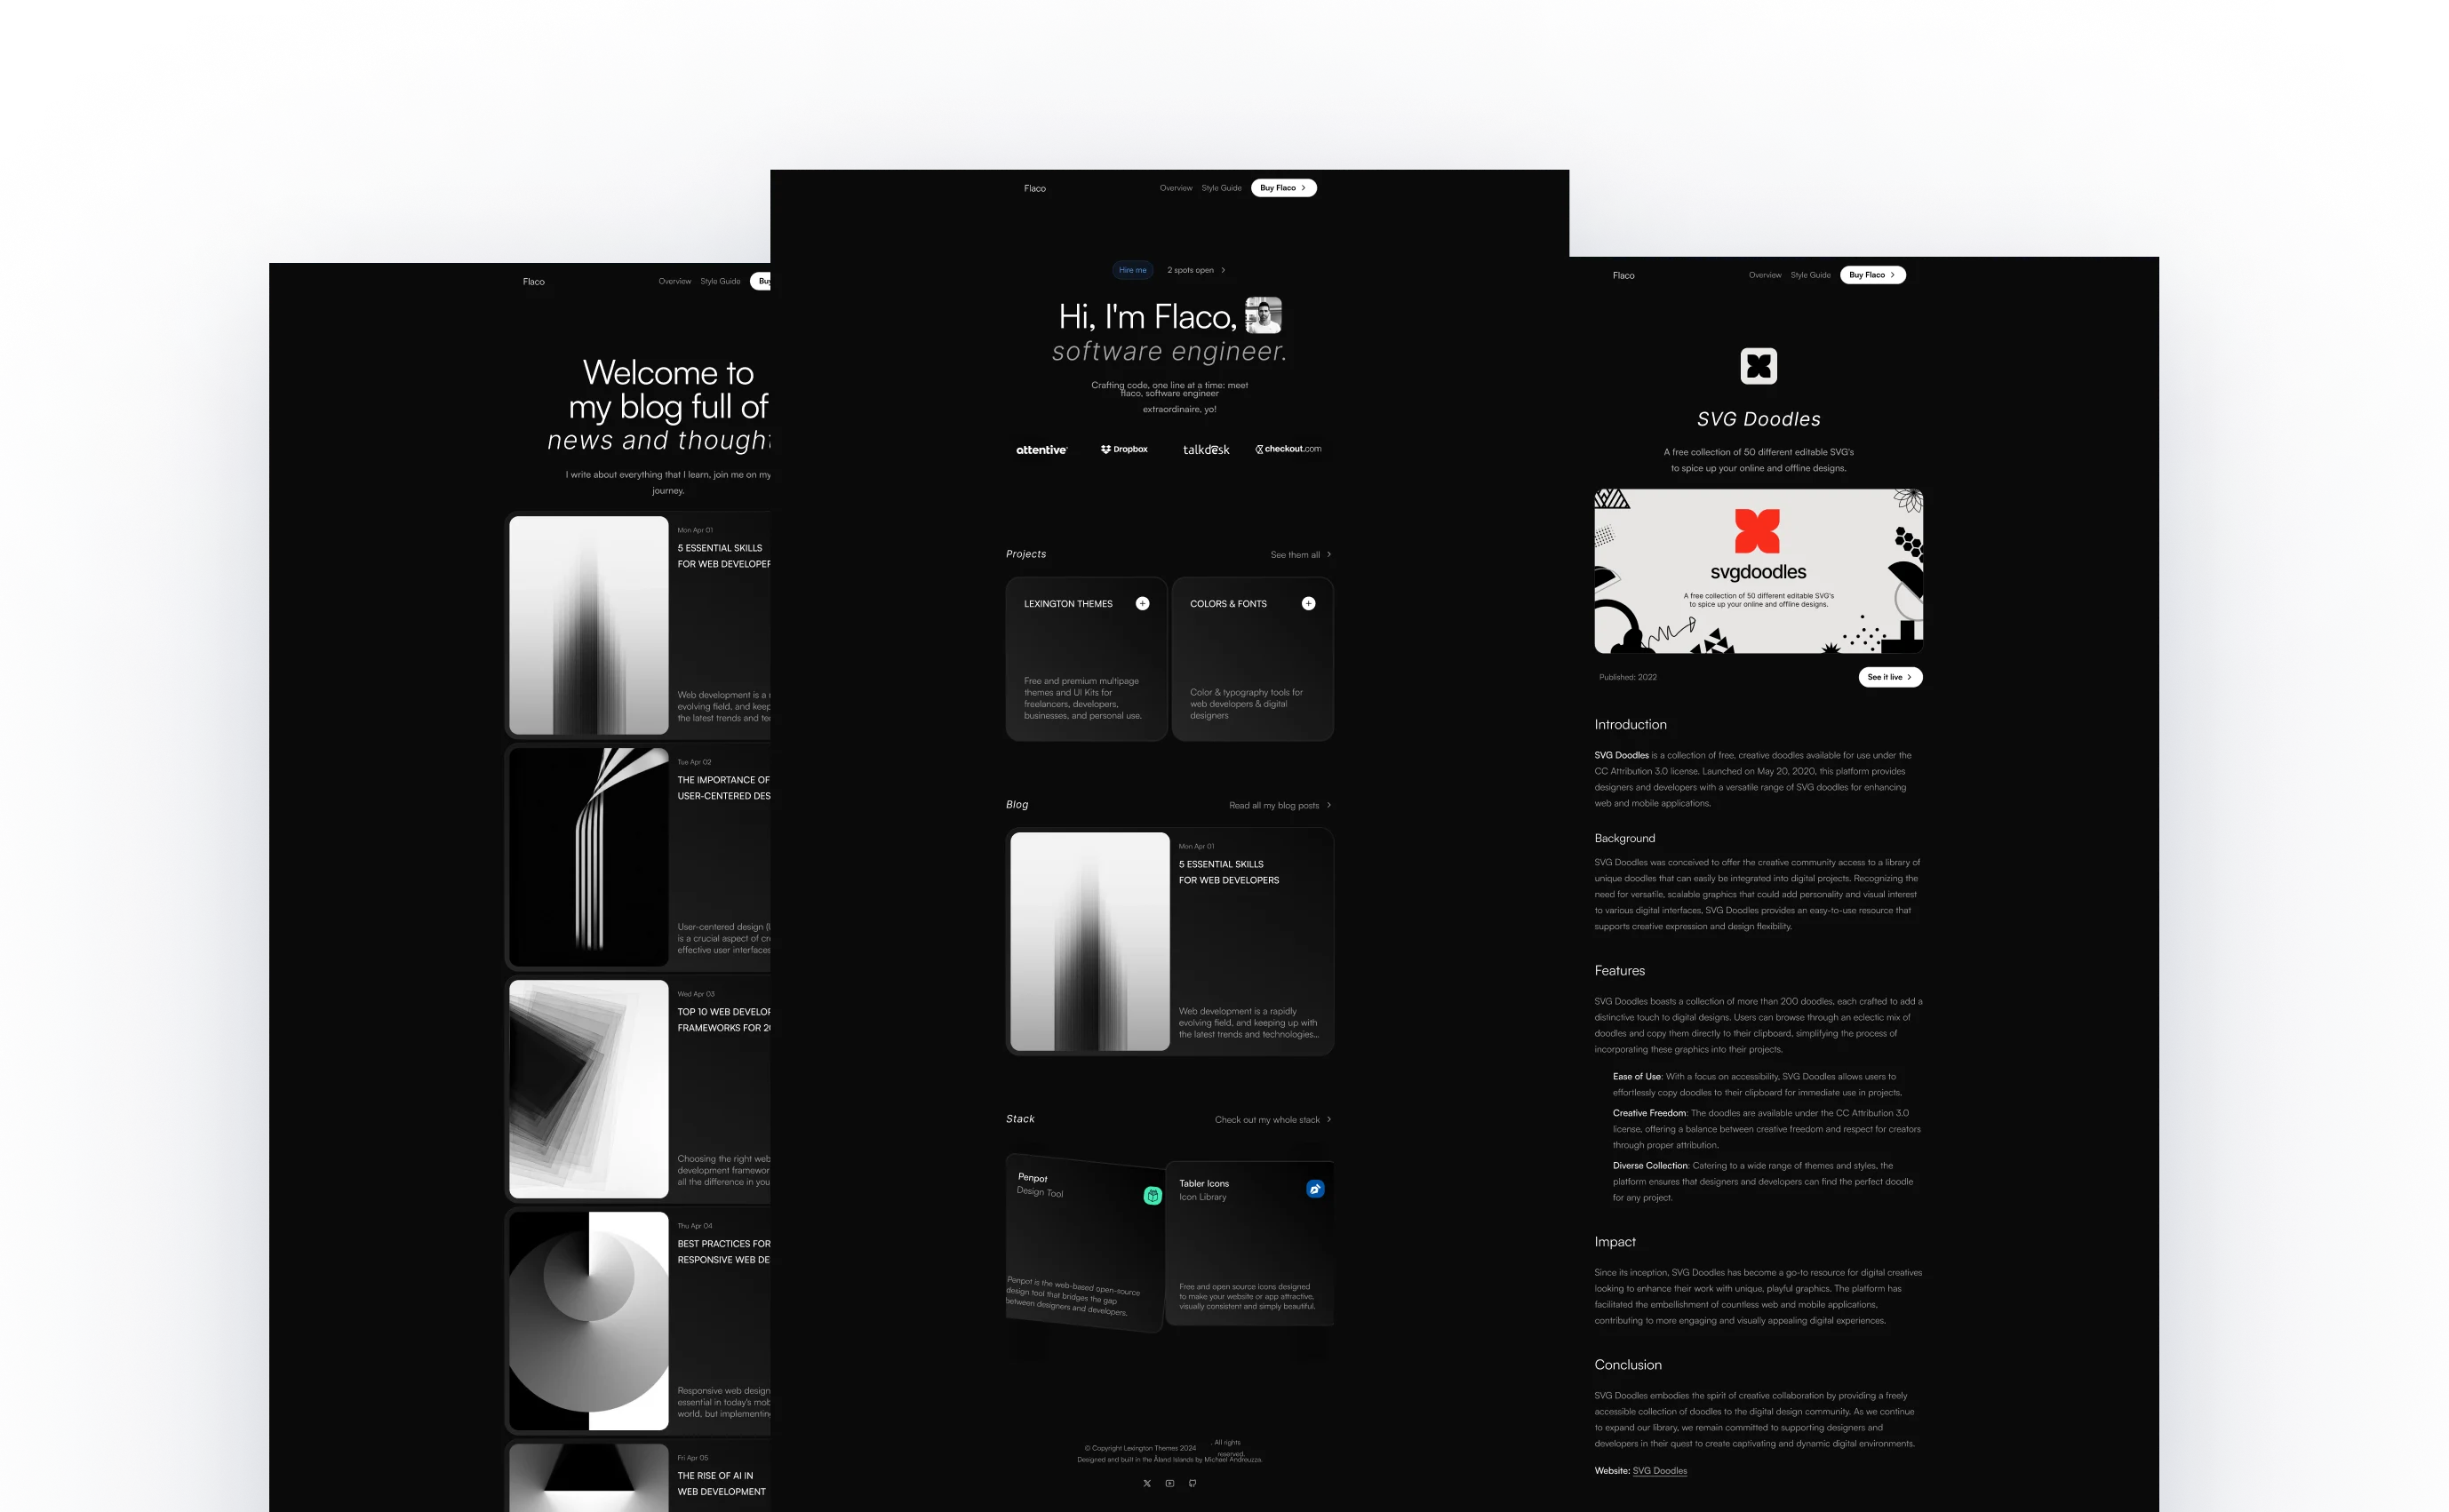 Flaco theme interface showcasing a dark design with text 'Markdown & Flaco is a Portfolio Study Mon,' a laptop on a bed, and various UI elements. Includes a brief intro of the designer from Finland and a call to action to view all projects.